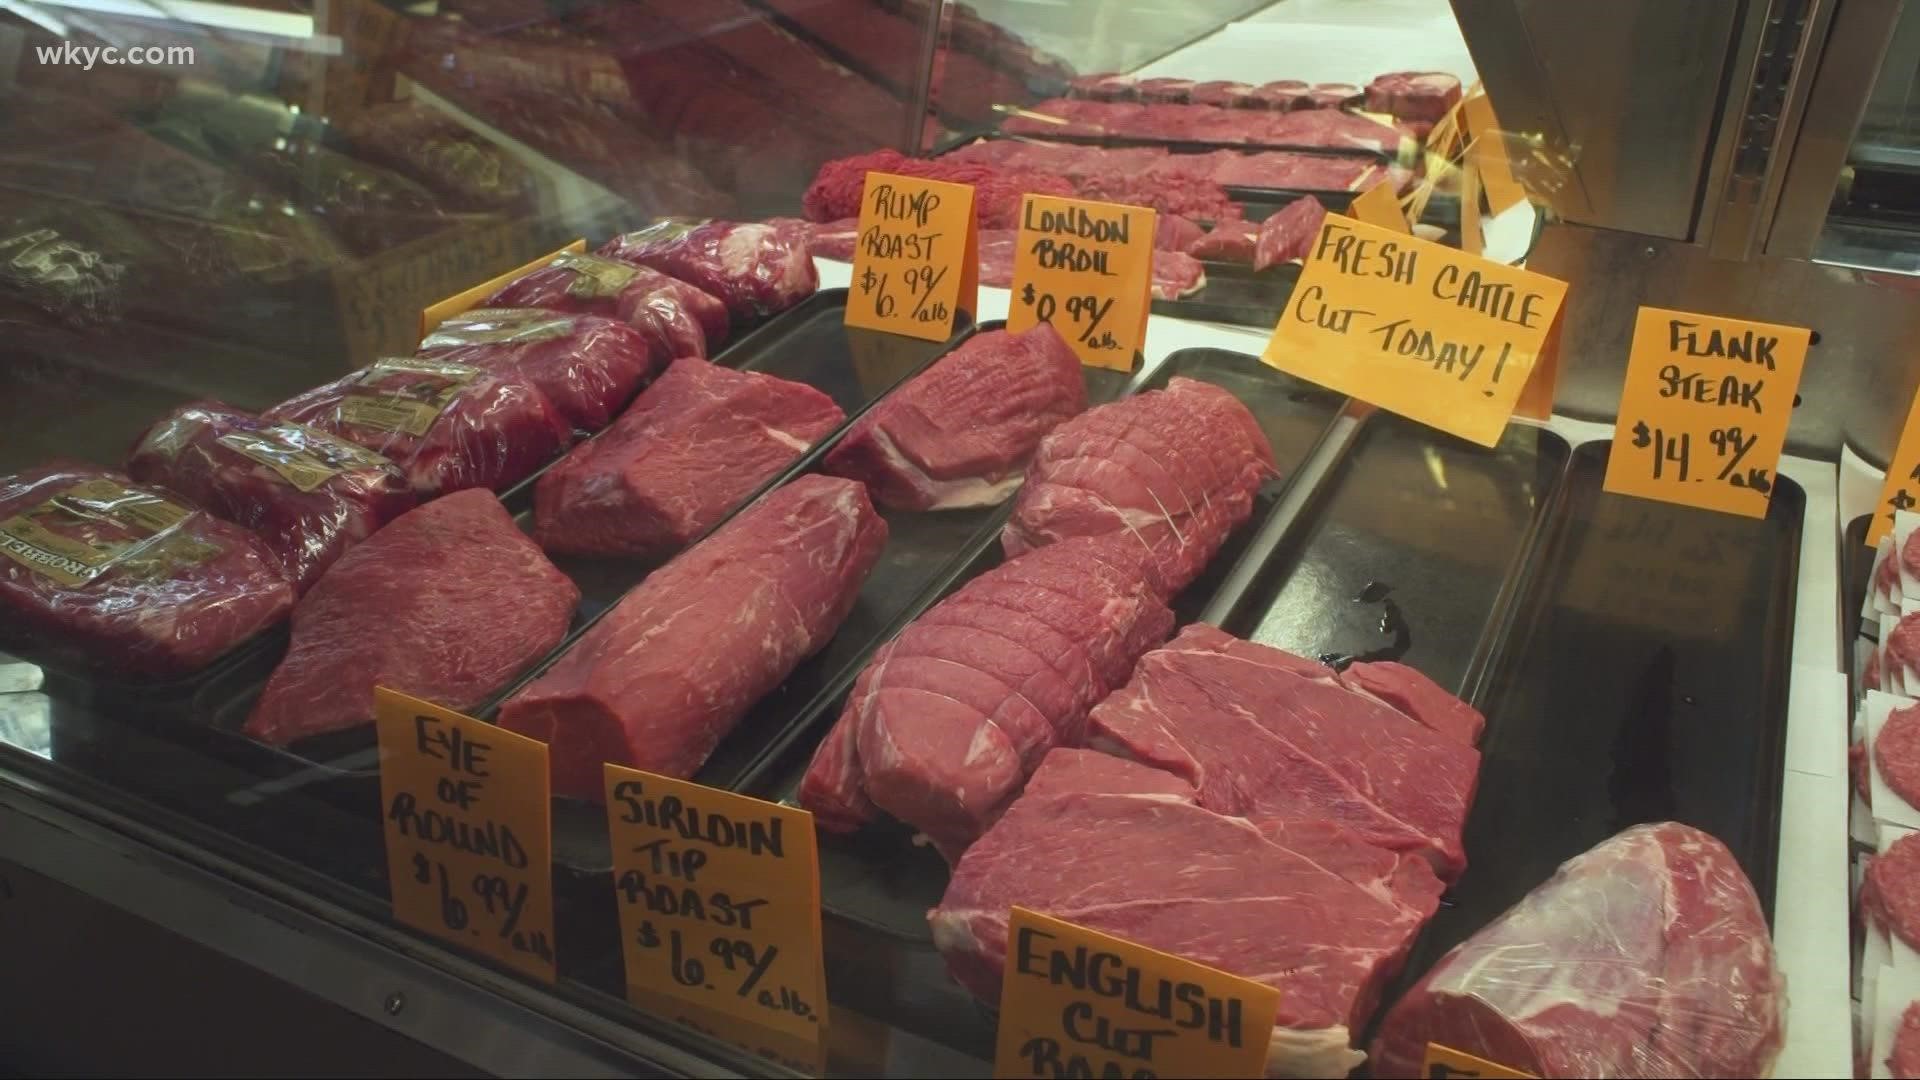 3News goes behind-the-scenes with vendors at the nearly 110 year-old Cleveland institution.